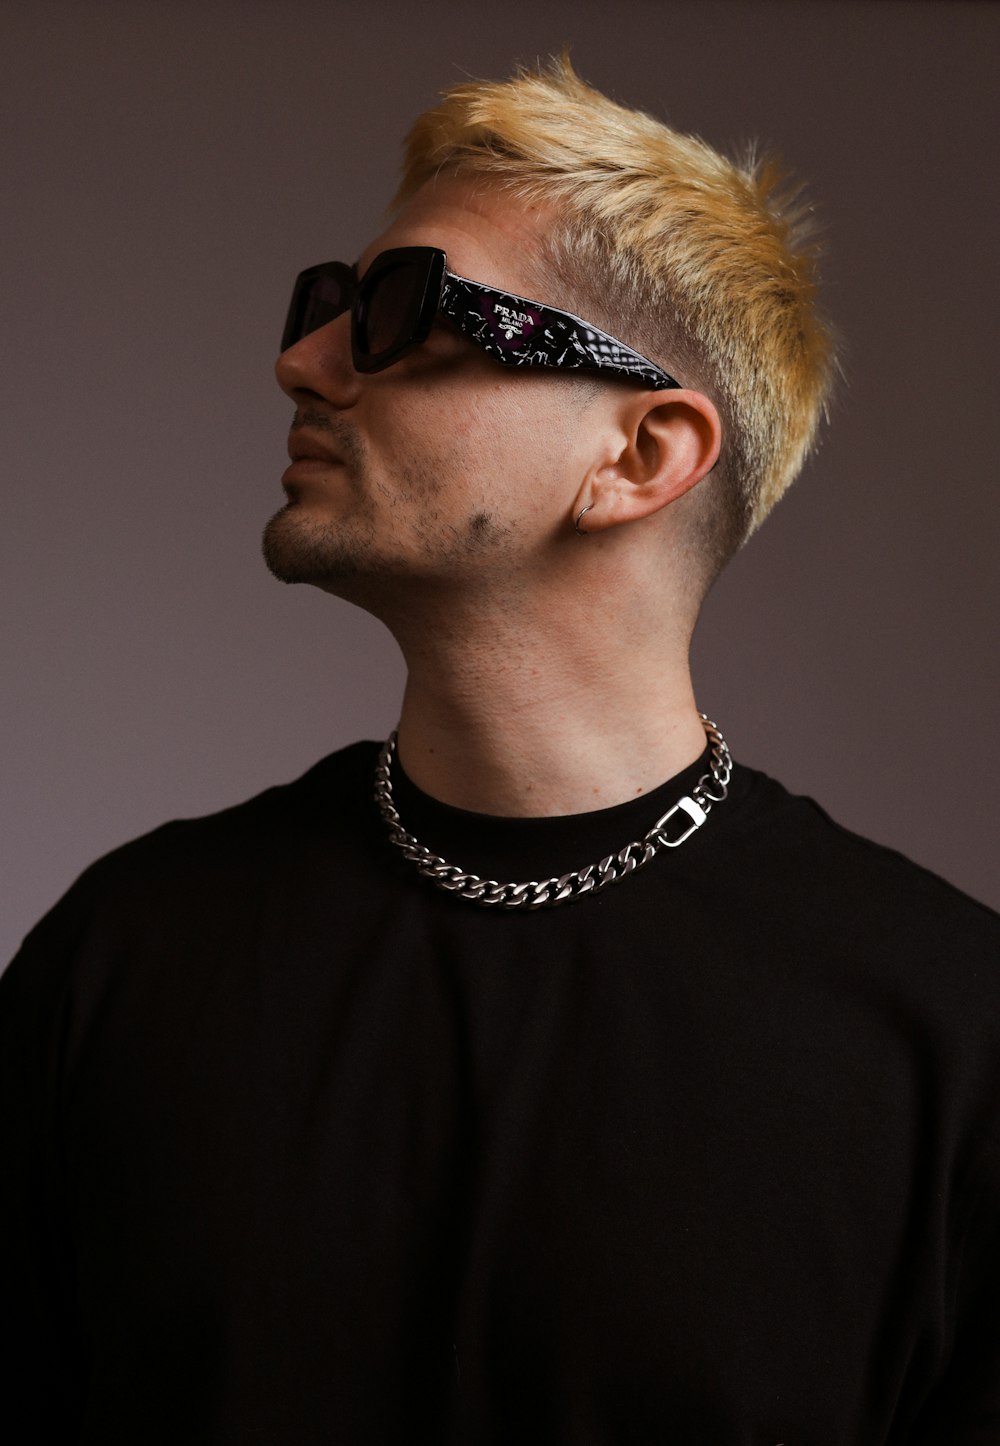 A man with blonde hair wearing sunglasses and a chain around his neck photo  – Free Studio Image on Unsplash